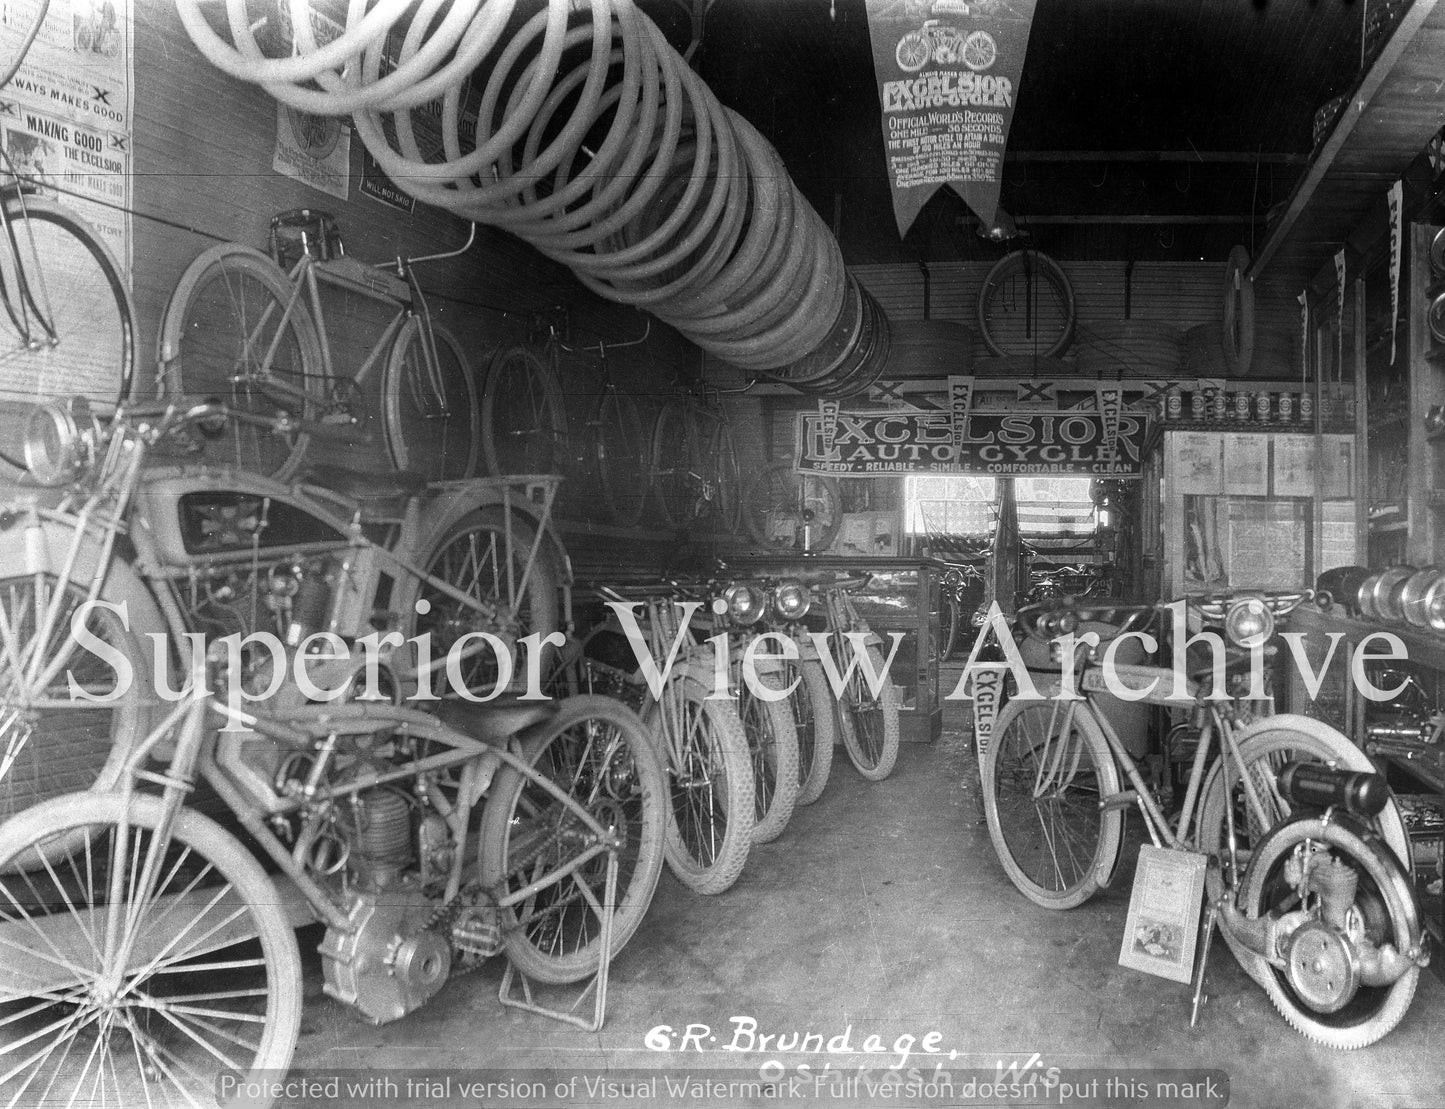 Excelsior Autocycle Motorcycle Show Room Oshkosh Wisconsin 1920 Signs Posters